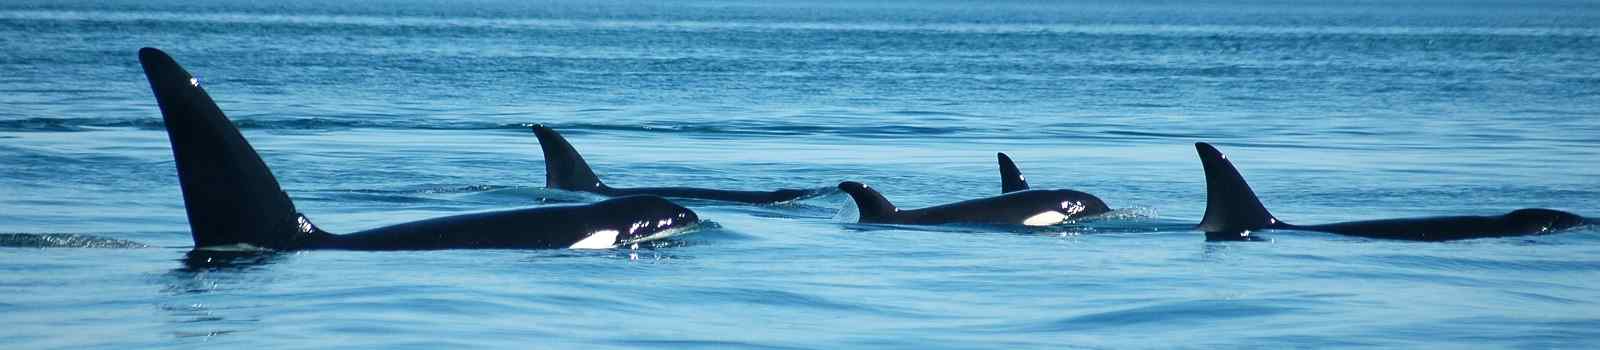 -Kanada orcas surfaces together